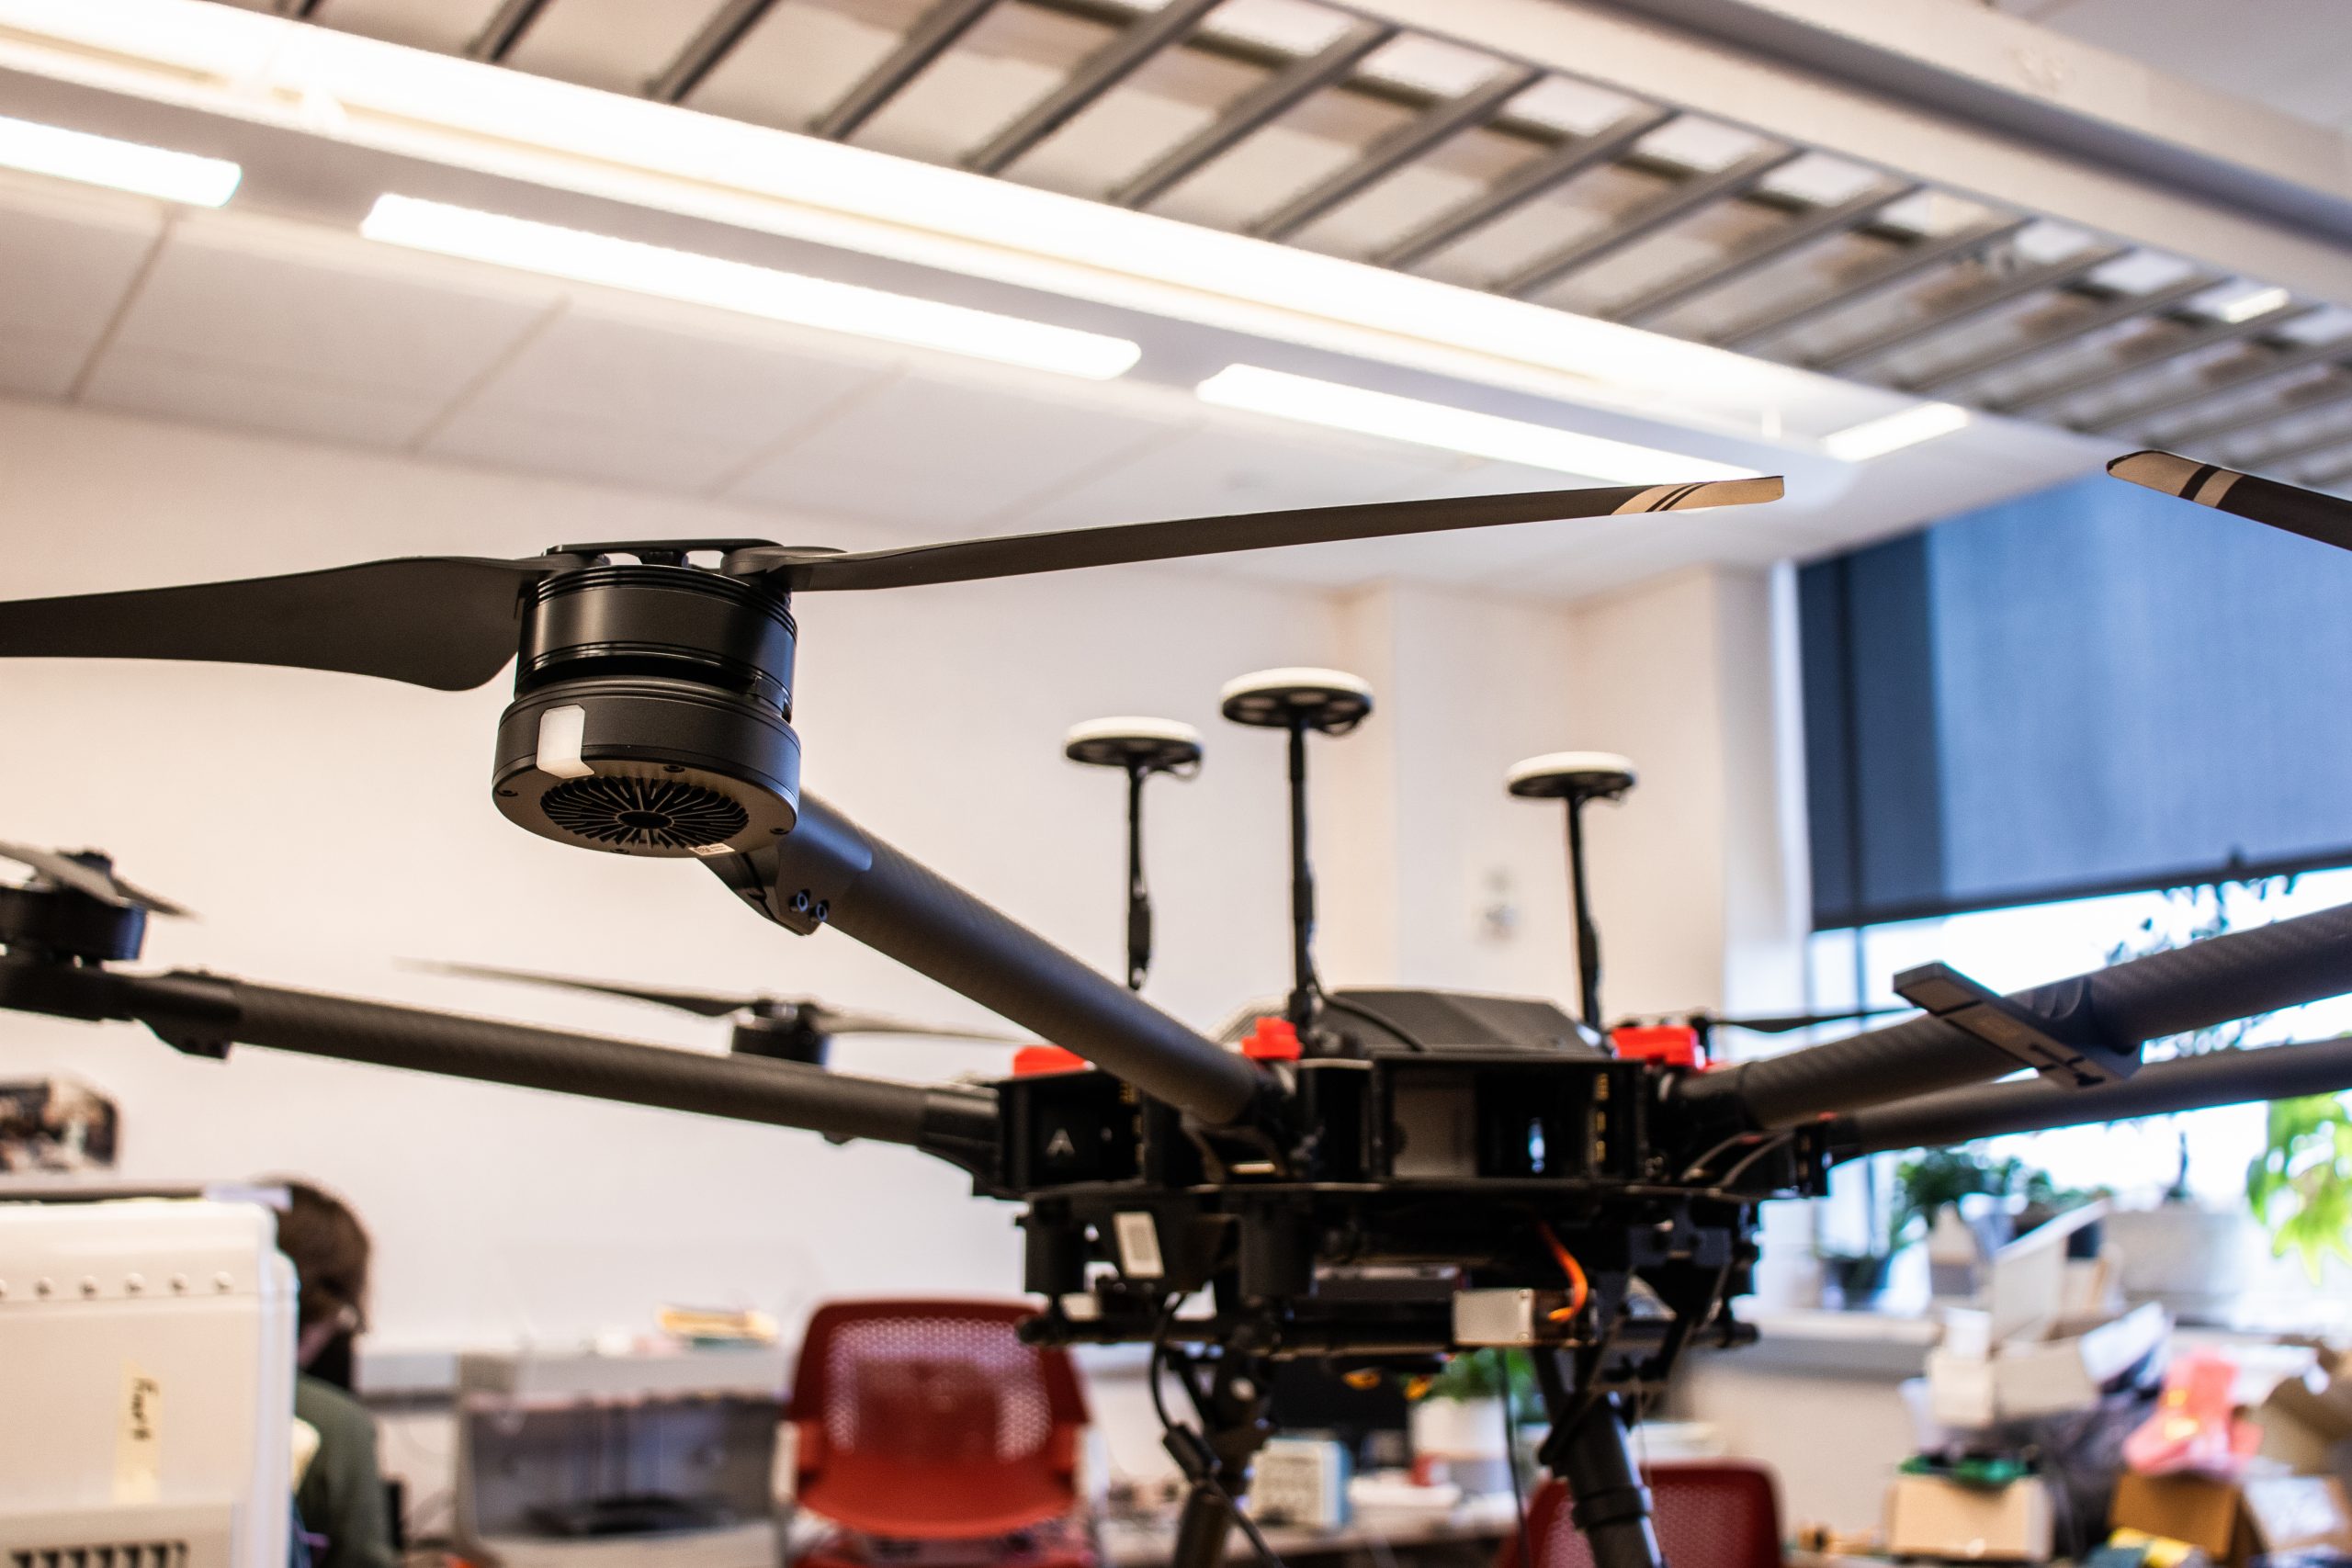 Photo of the drone in the lab. The drone is black with wings coming out of the arms on the drone